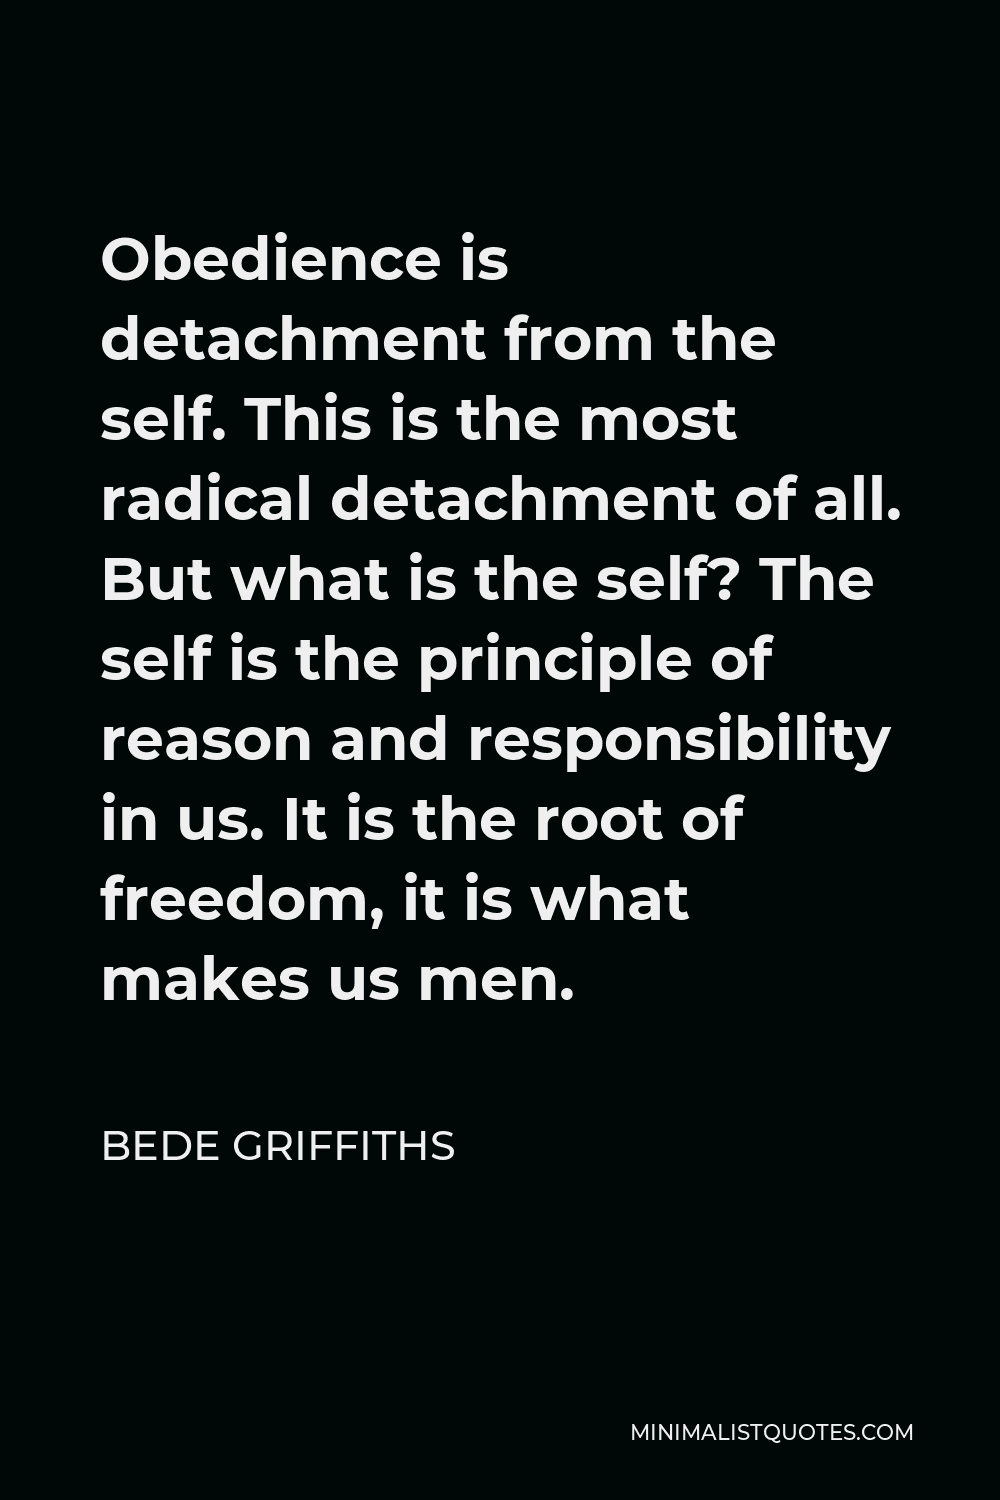 Bede Griffiths Quote - Obedience is detachment from the self. This is the most radical detachment of all. But what is the self? The self is the principle of reason and responsibility in us. It is the root of freedom, it is what makes us men.